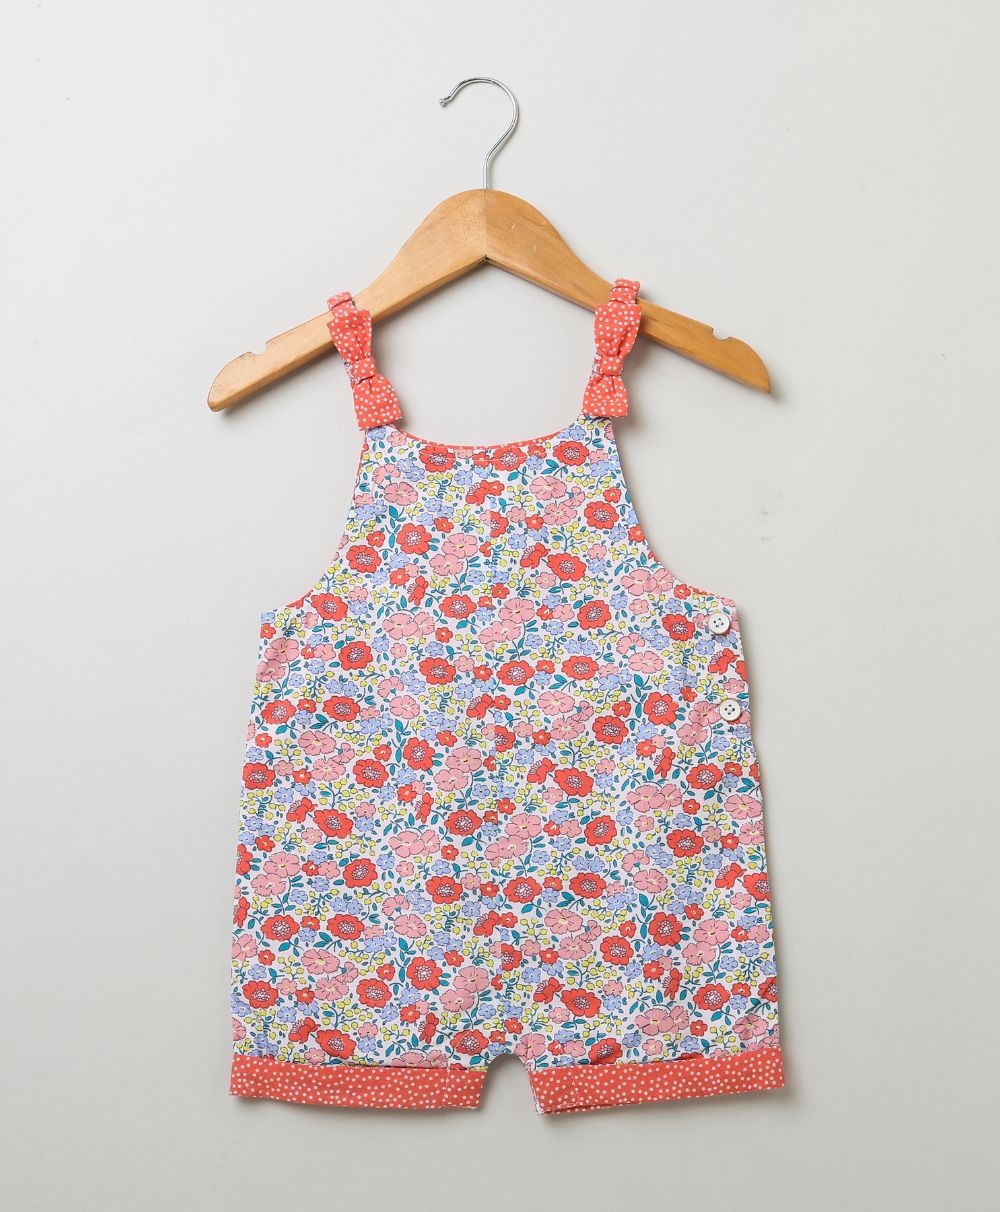 All-over Floral Print Dungaree